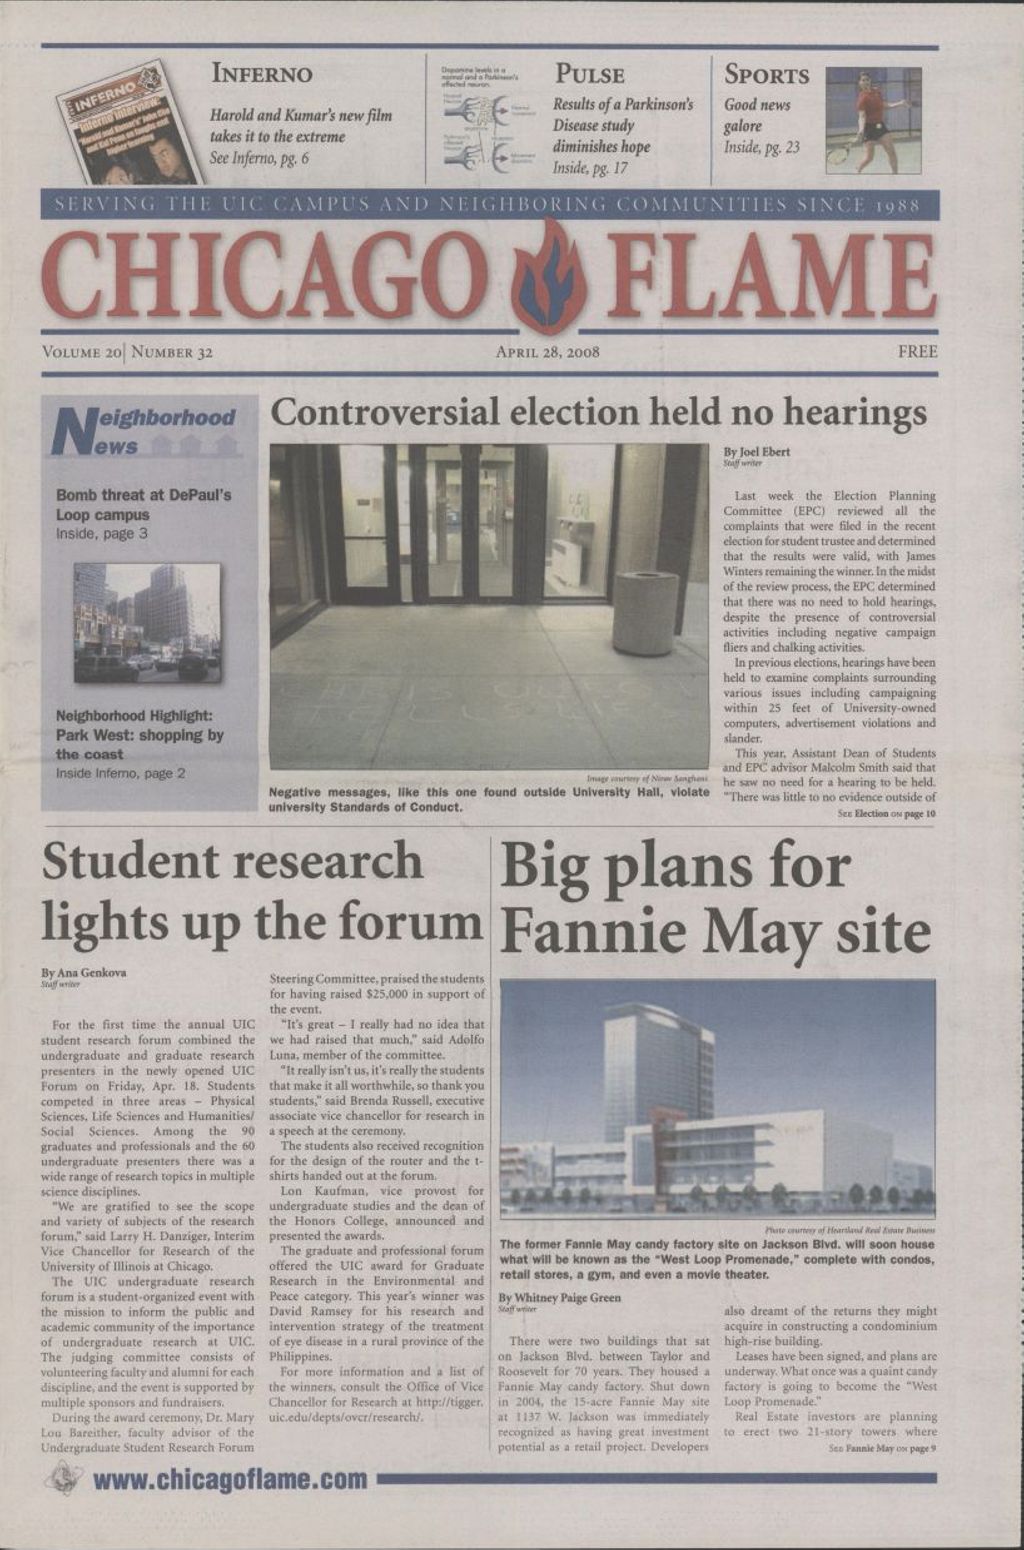 Miniature of Chicago Flame (April 28, 2008)